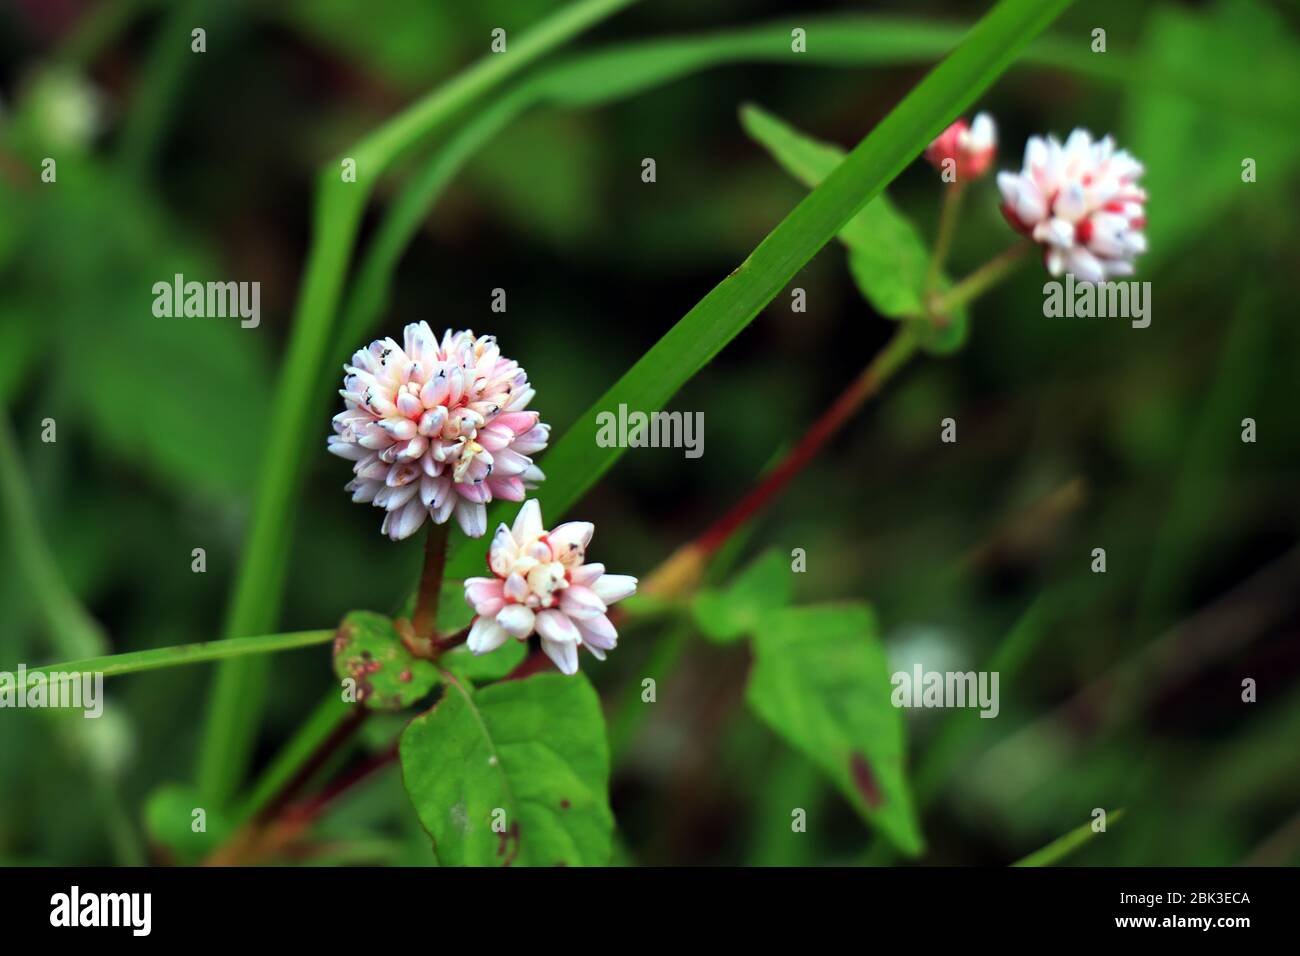 Persicaria capitata Polygonum flowers / Persicaria capitata Polygonum is a vine evergreen perennial that grows on the ground for a long time. Stock Photo